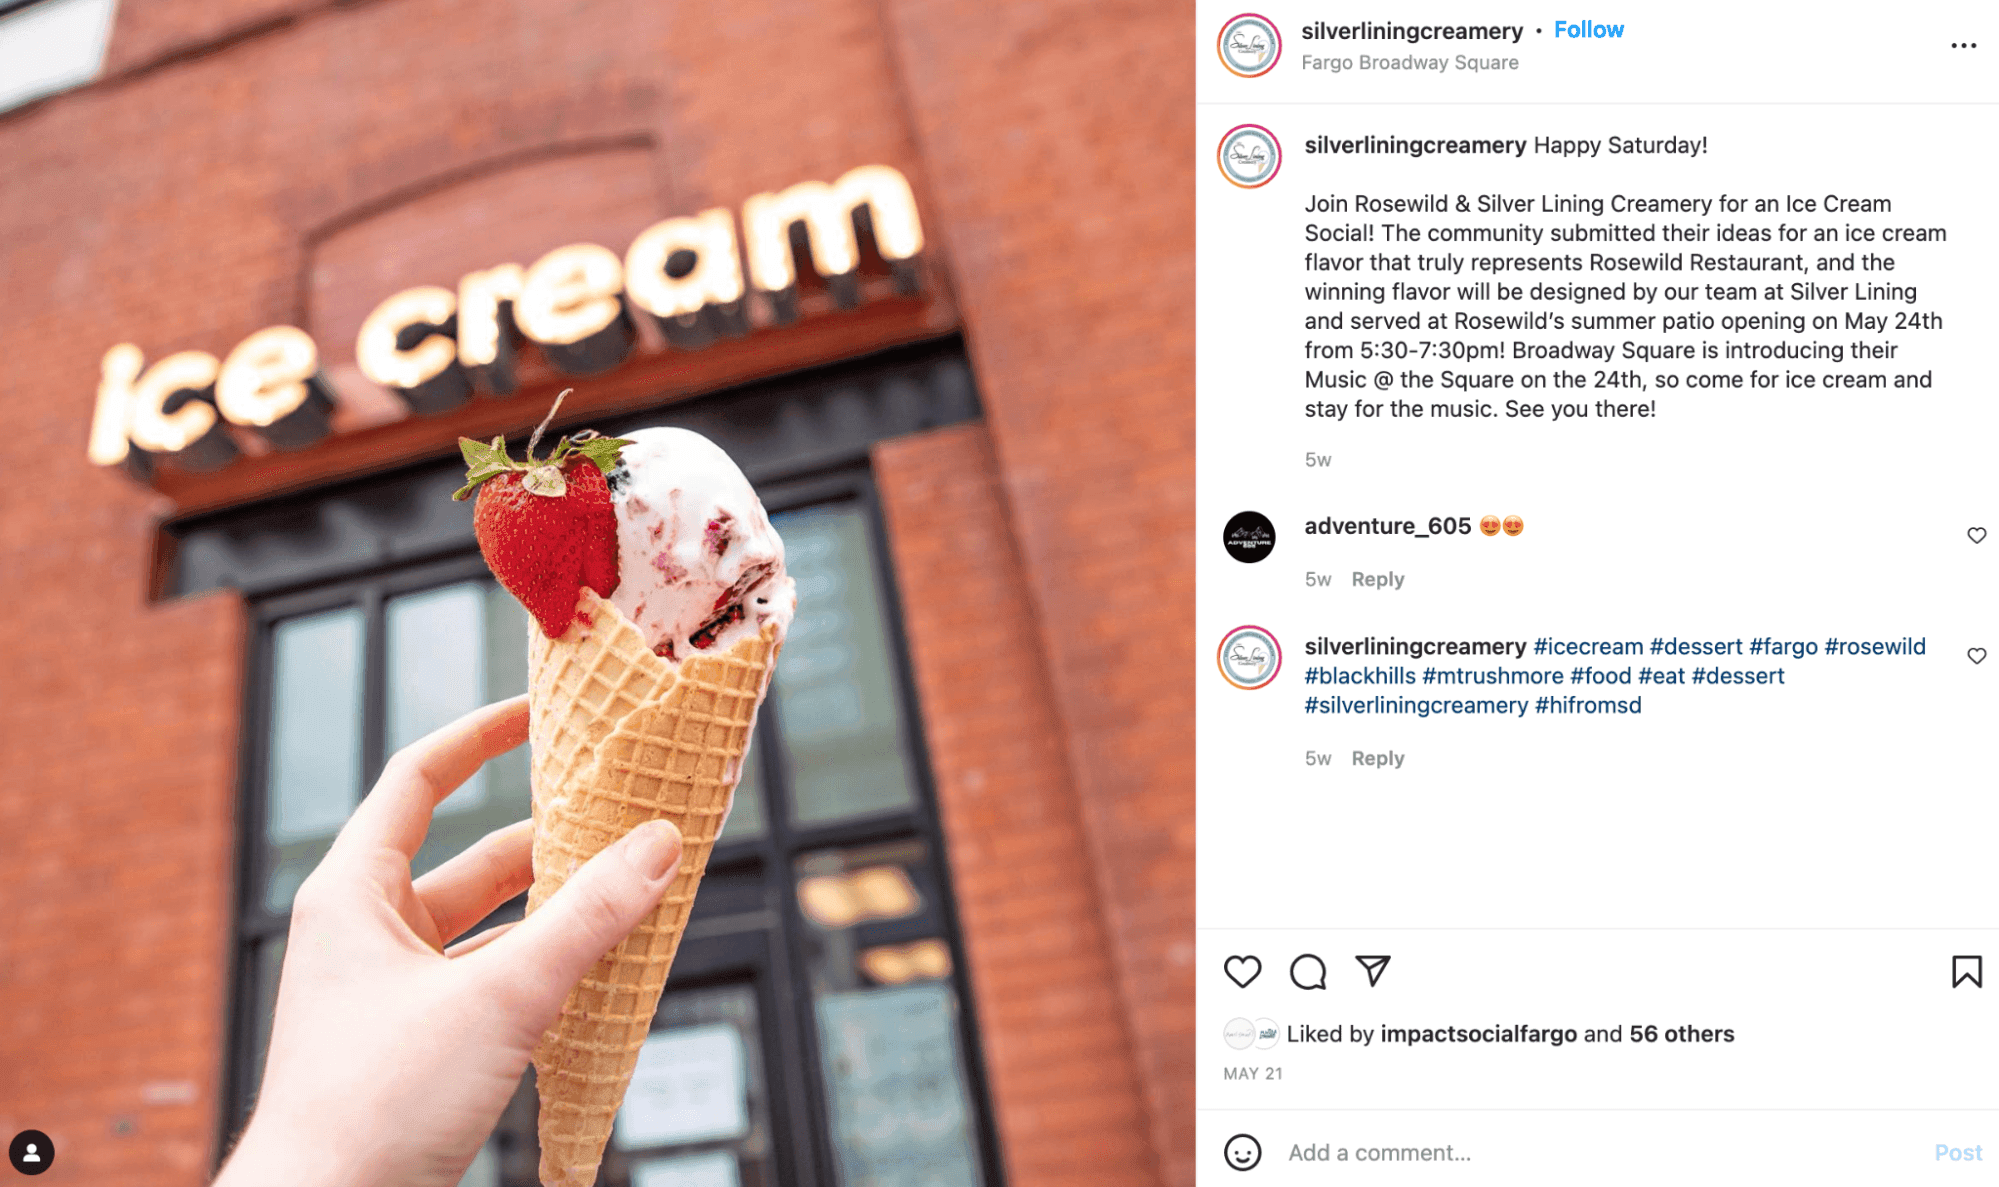 Example of high-quality, aesthetic brand from Silver Lining Creamery on Instagram